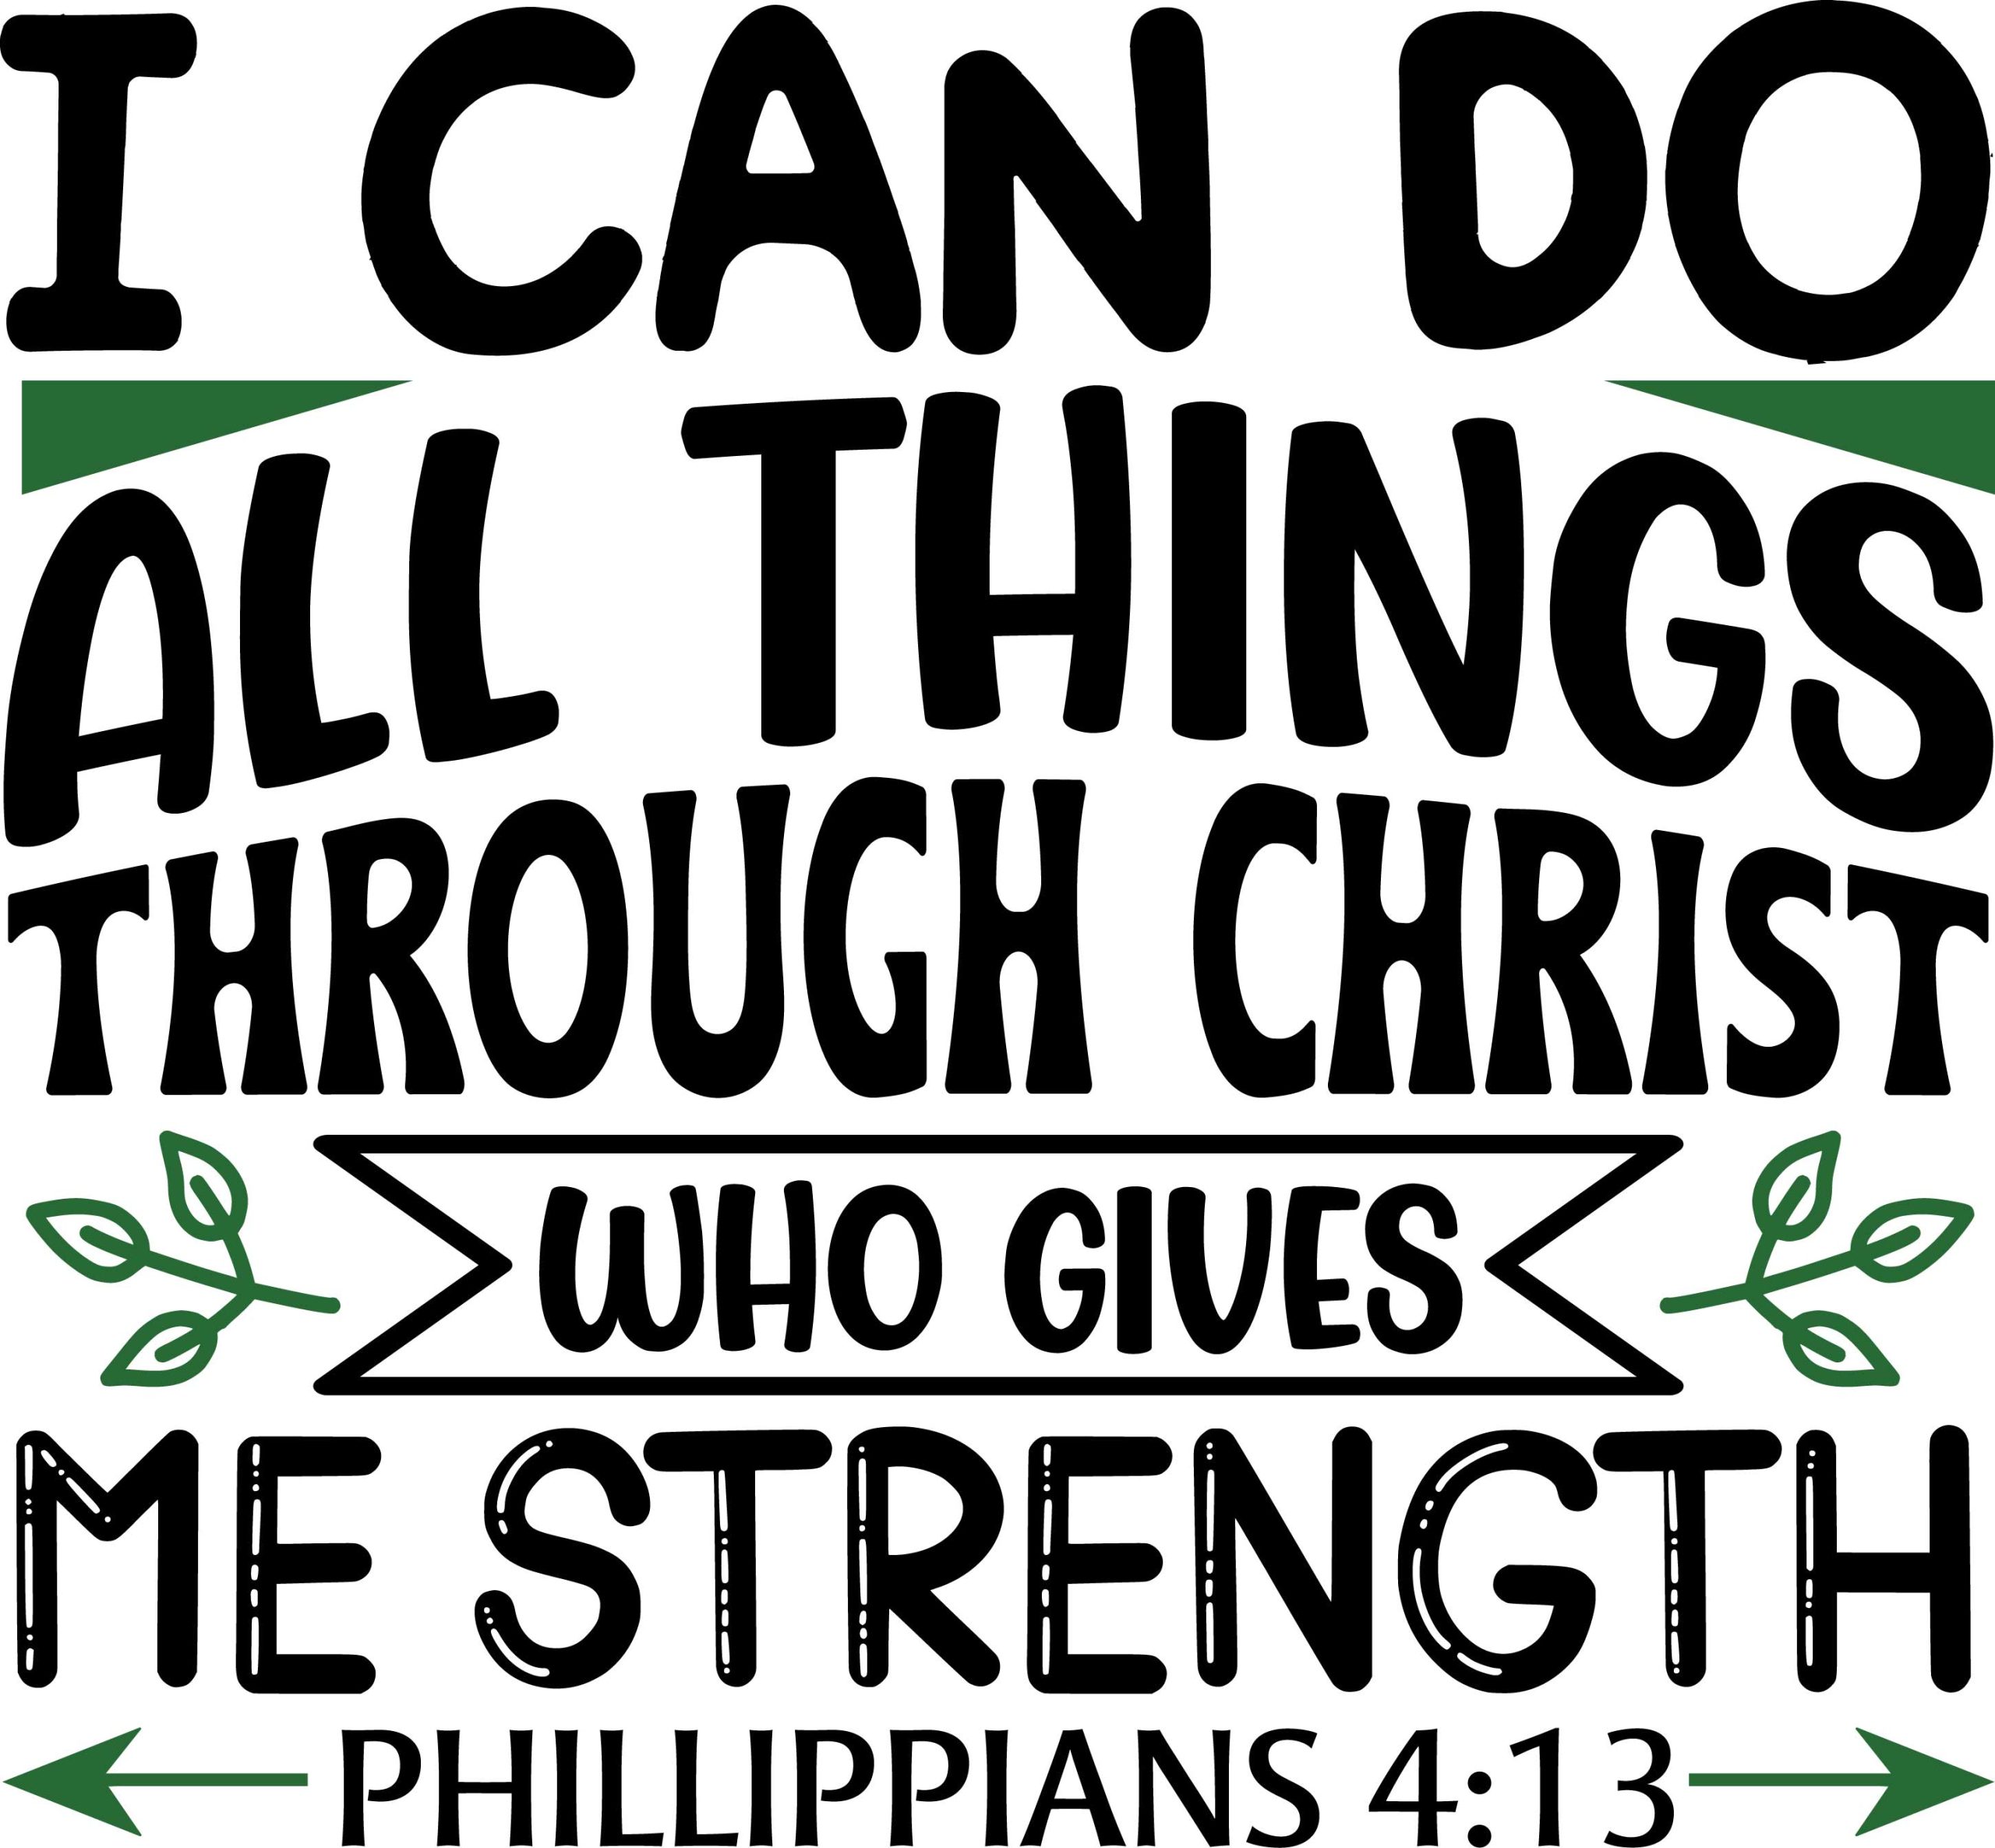 I can do all things through christ who gives me strength Phillippians 4:13, bible verses, scripture verses, svg files, passages, sayings, cricut designs, silhouette, embroidery, bundle, free cut files, design space, vector